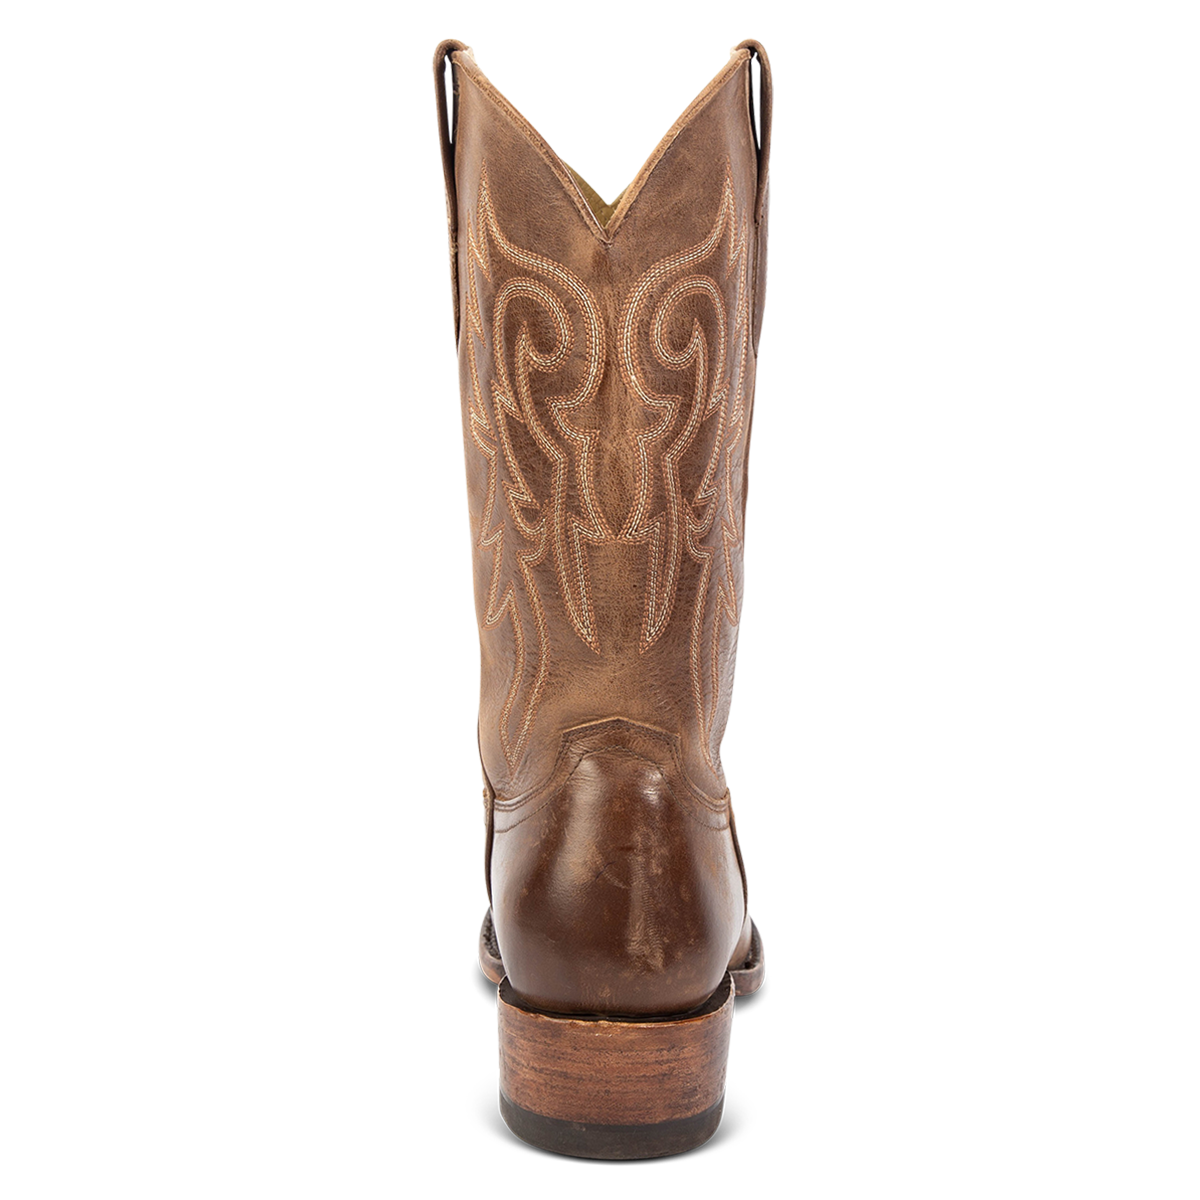 Back view showing FREEBIRD men's Marshall brown distressed leather western cowboy boot with shaft stitch detailing, a stacked heel and leather pull straps